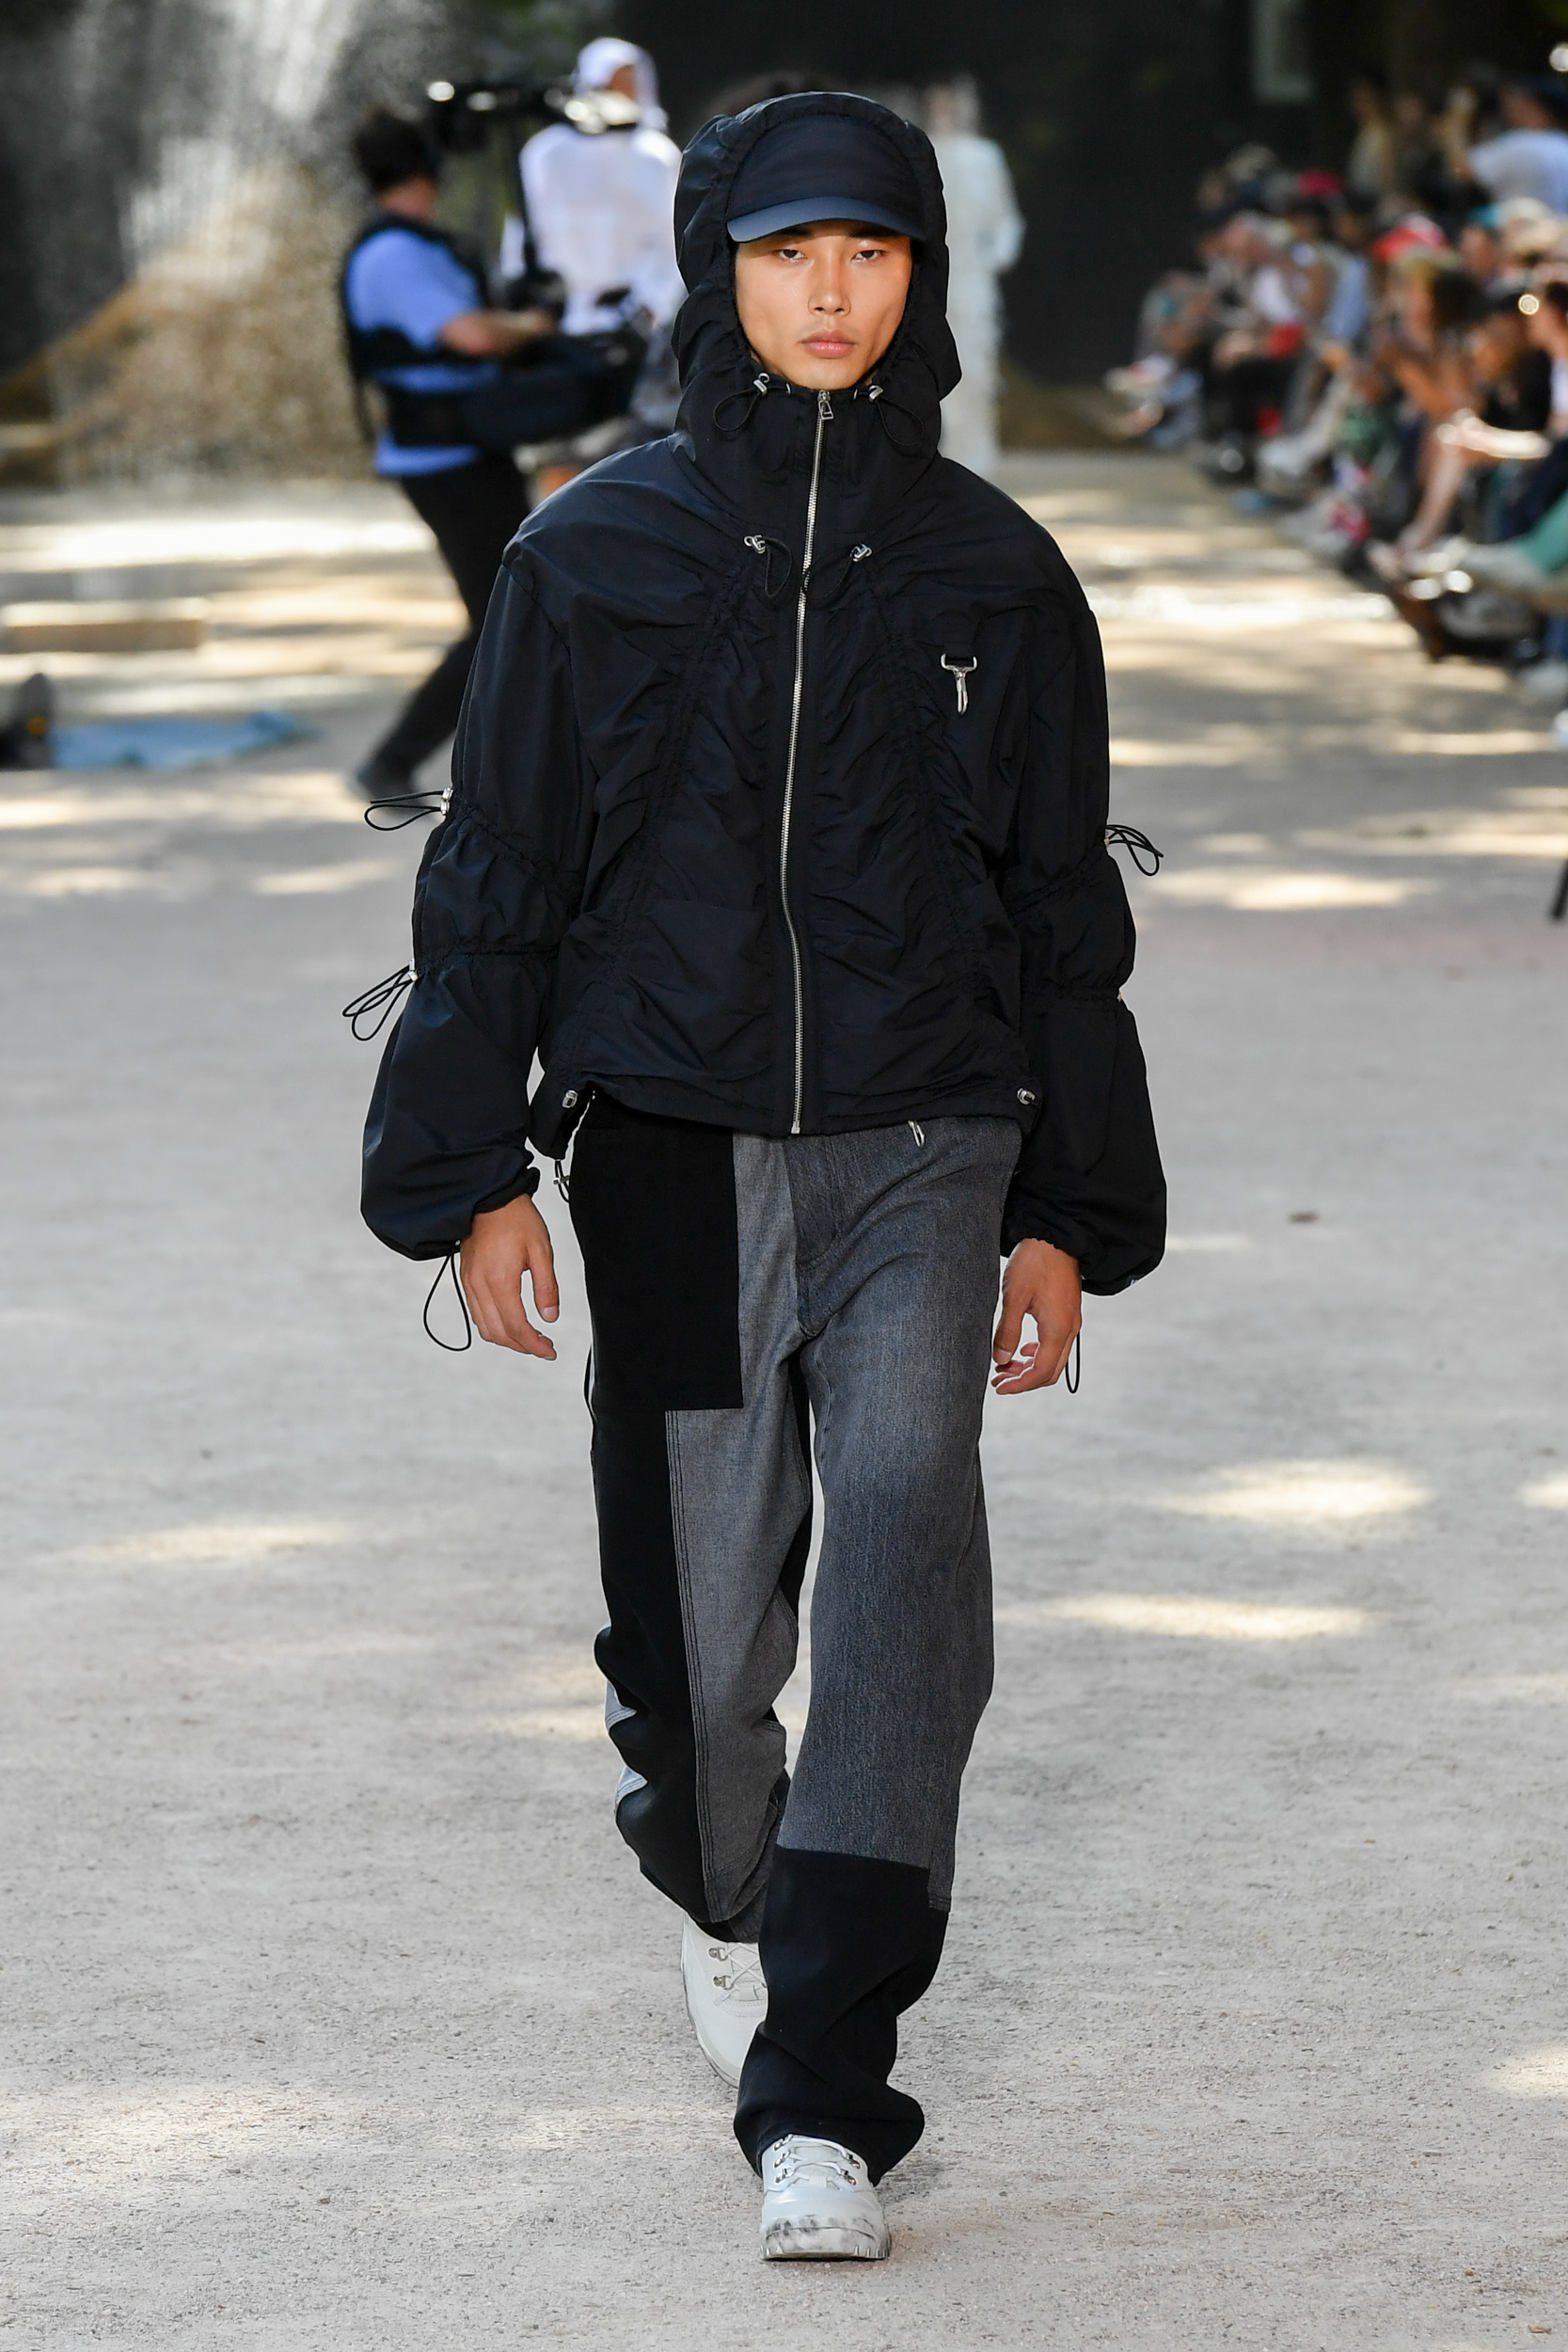 Reese Cooper Spring 2023 Men's Fashion Show 